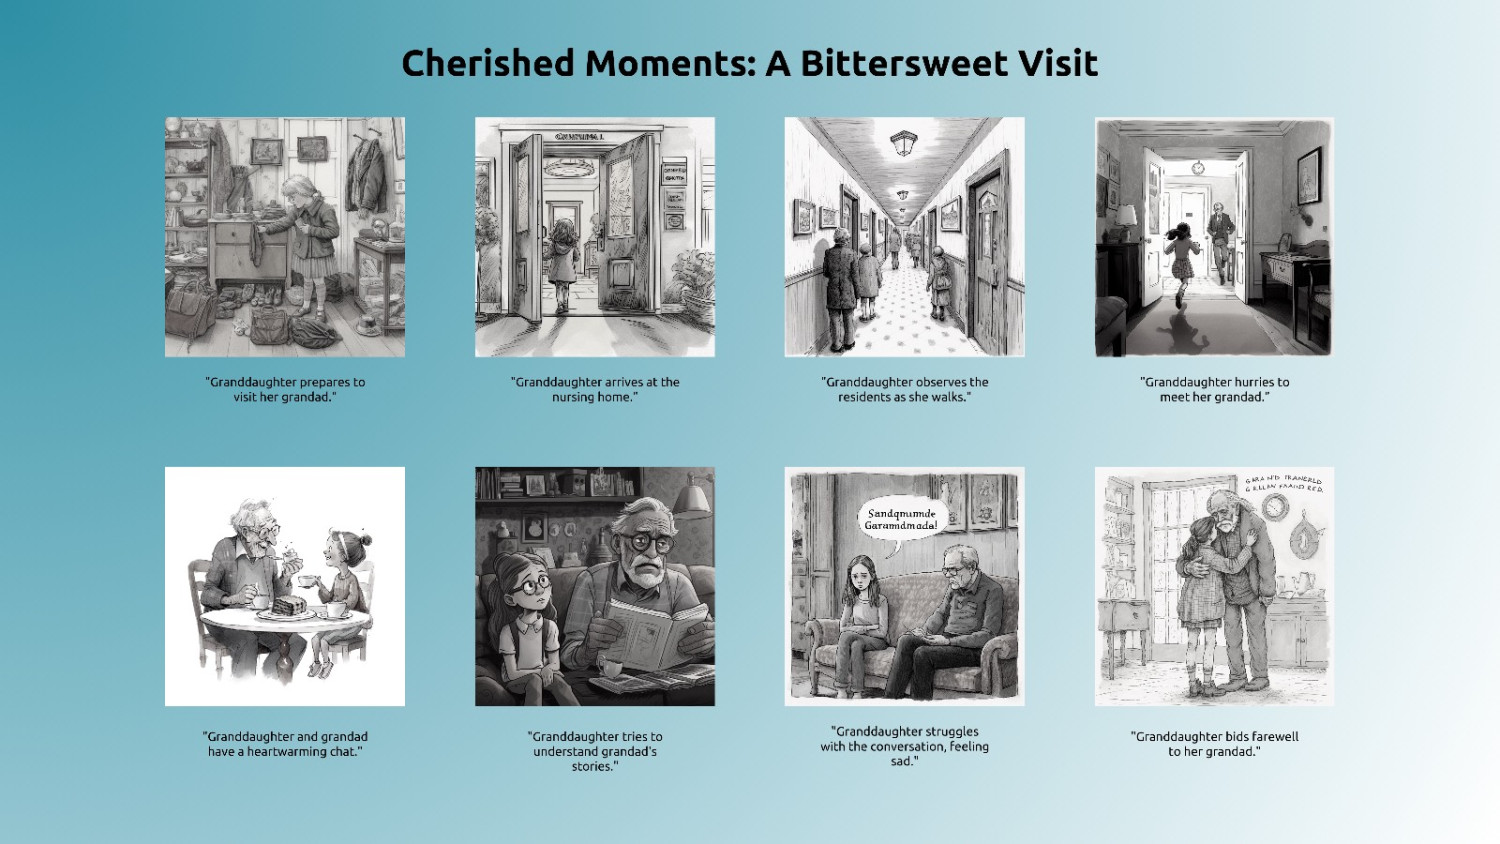 *Cherished Moments: A Bittersweet Visit*, Midjourney generated